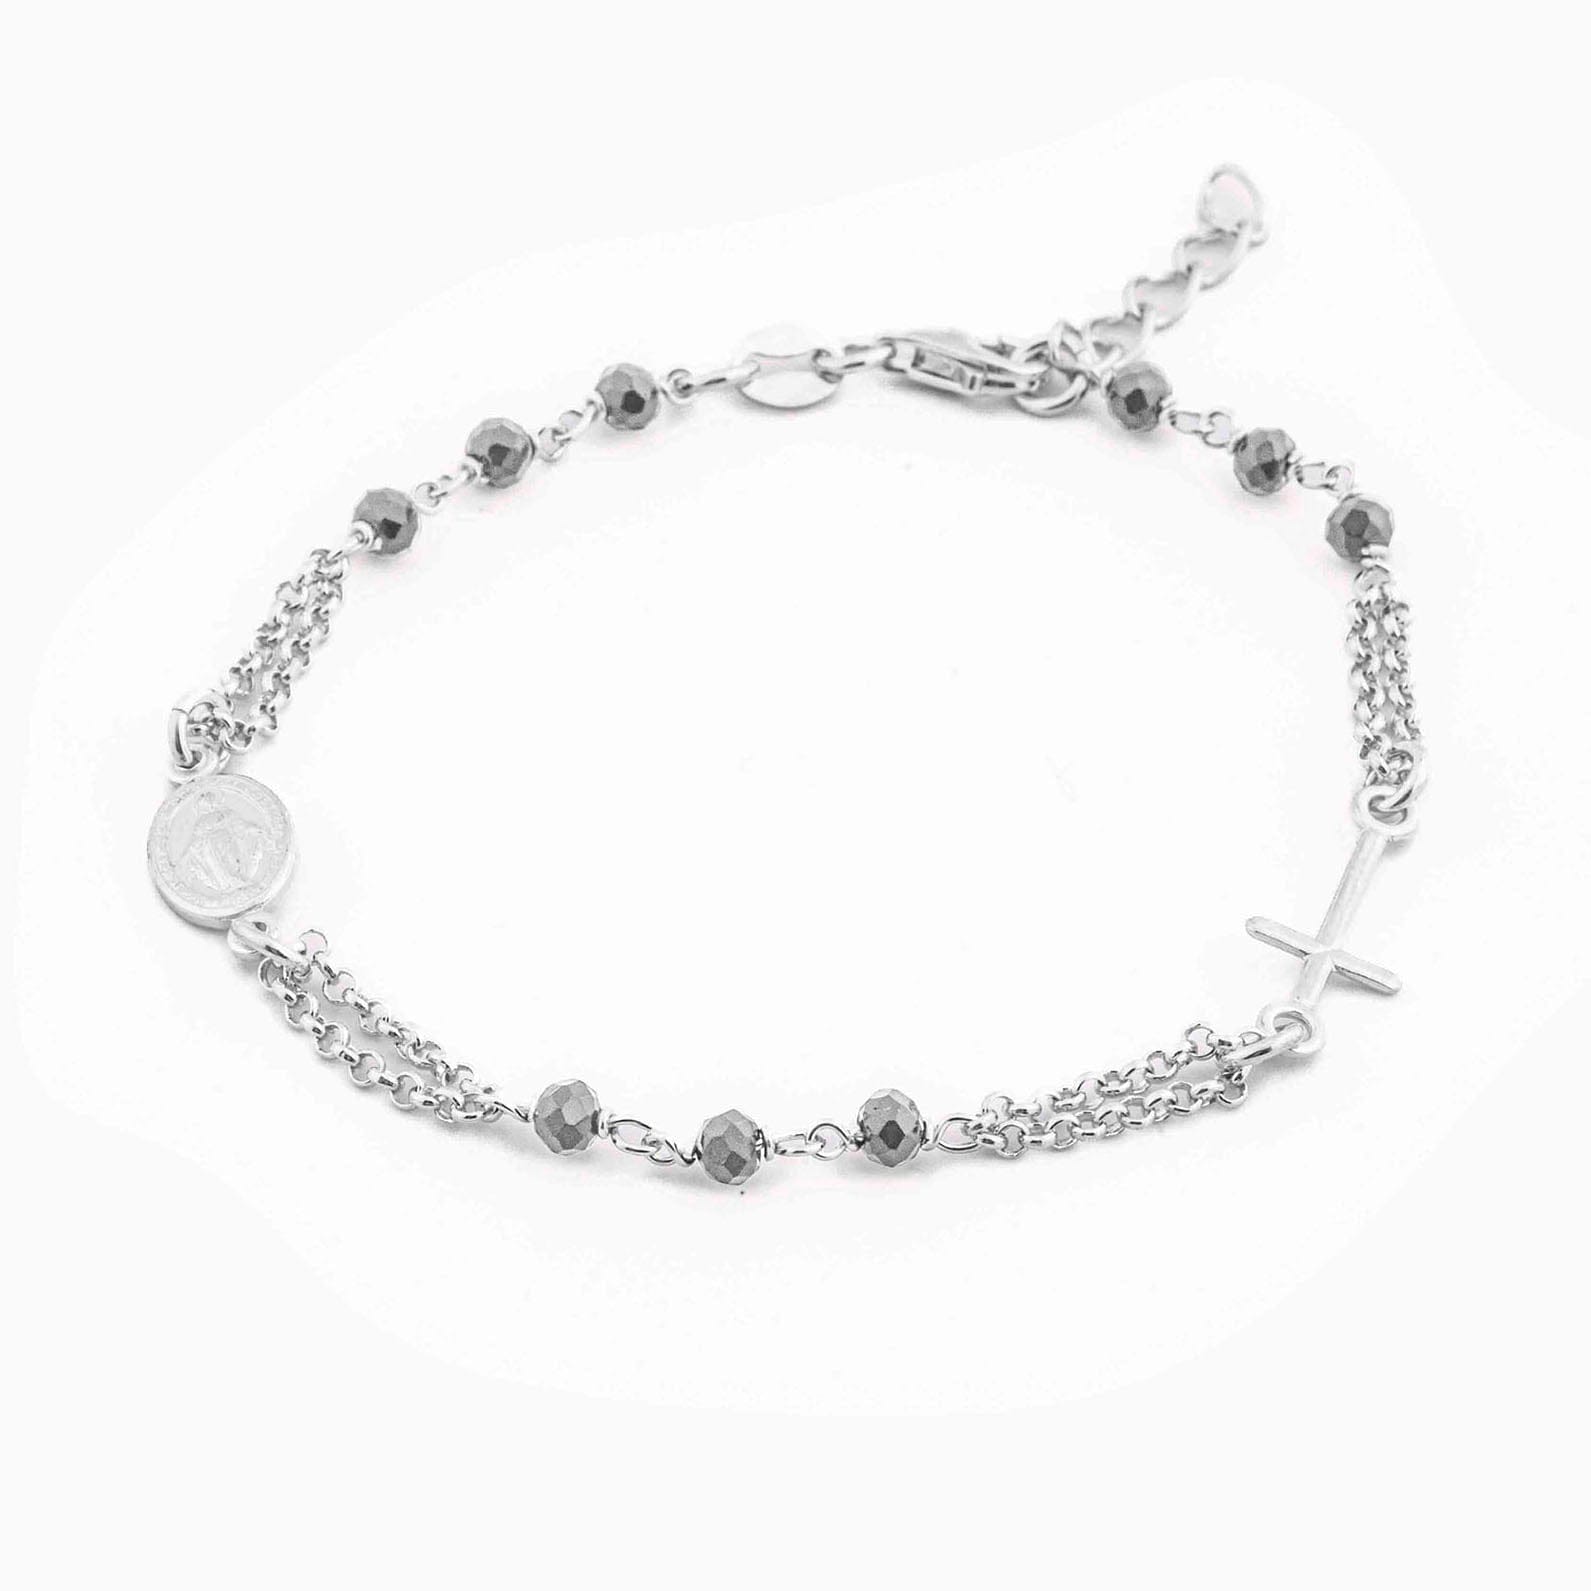 MONDO CATTOLICO Prayer Beads Rhodium / Cm 17.5 (6.9 in) / Cm 3 (1.2 in) STERLING SILVER ROSARY BRACELET DOUBLE CHAIN GREY FACETED BEADS